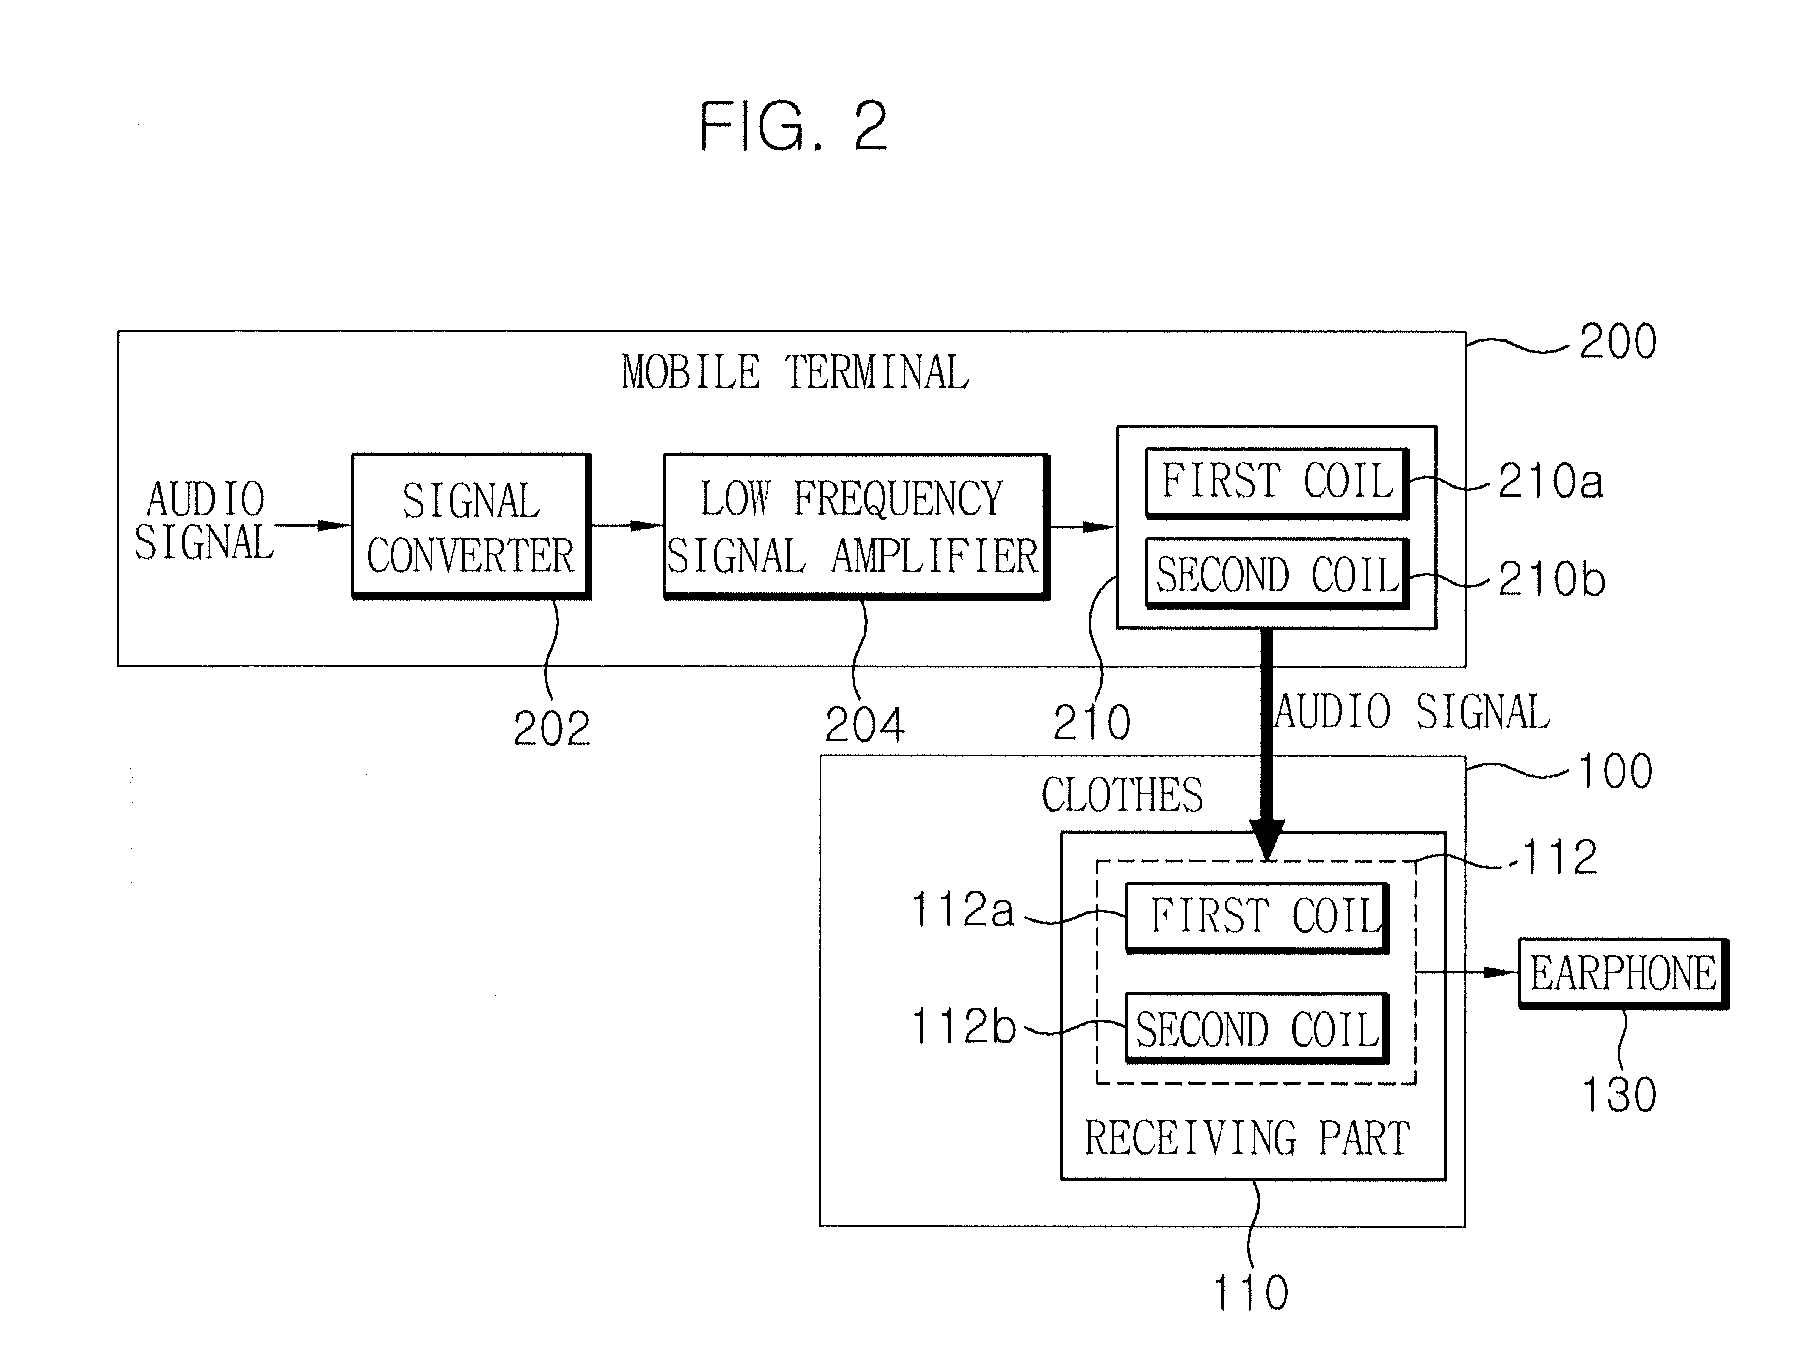 Textile-based magnetic field interface clothes and mobile terminal in wearable computing system